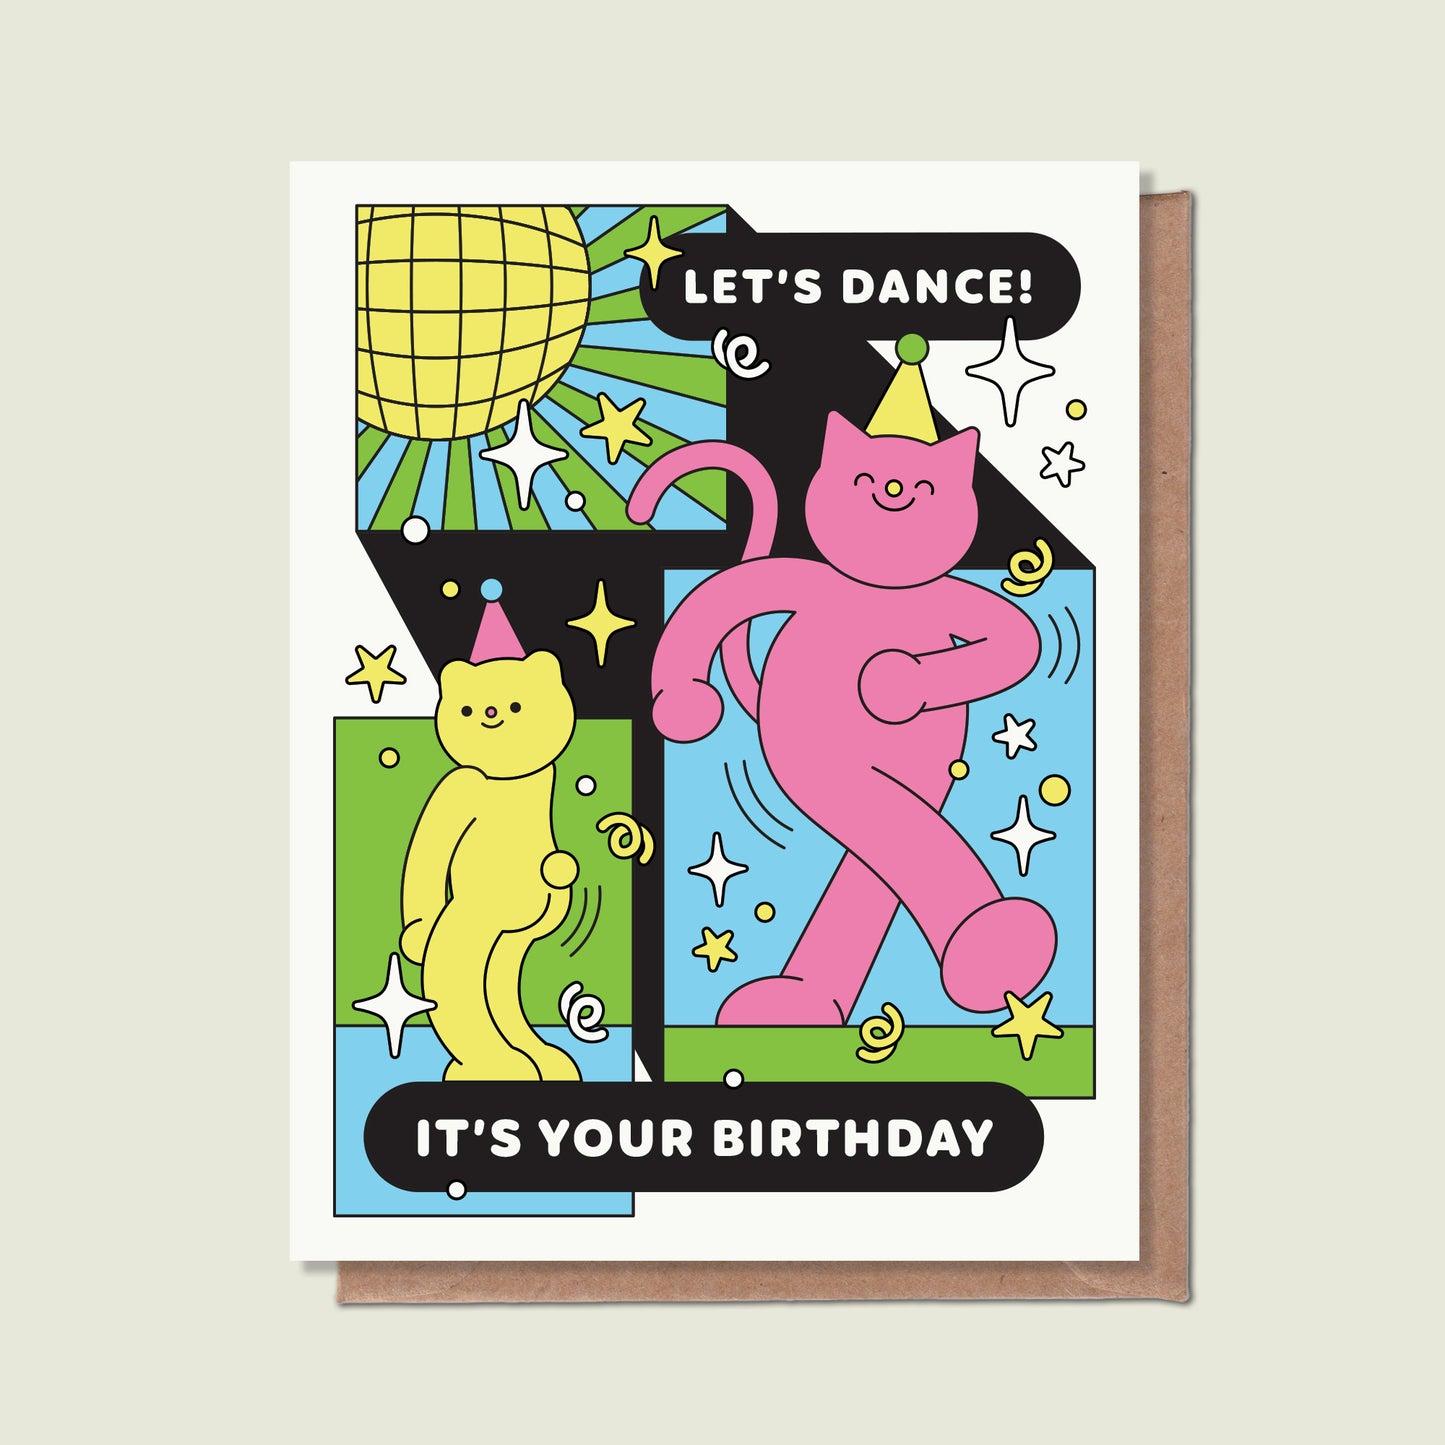 Let's Dance, It's Your Birthday Greeting Card